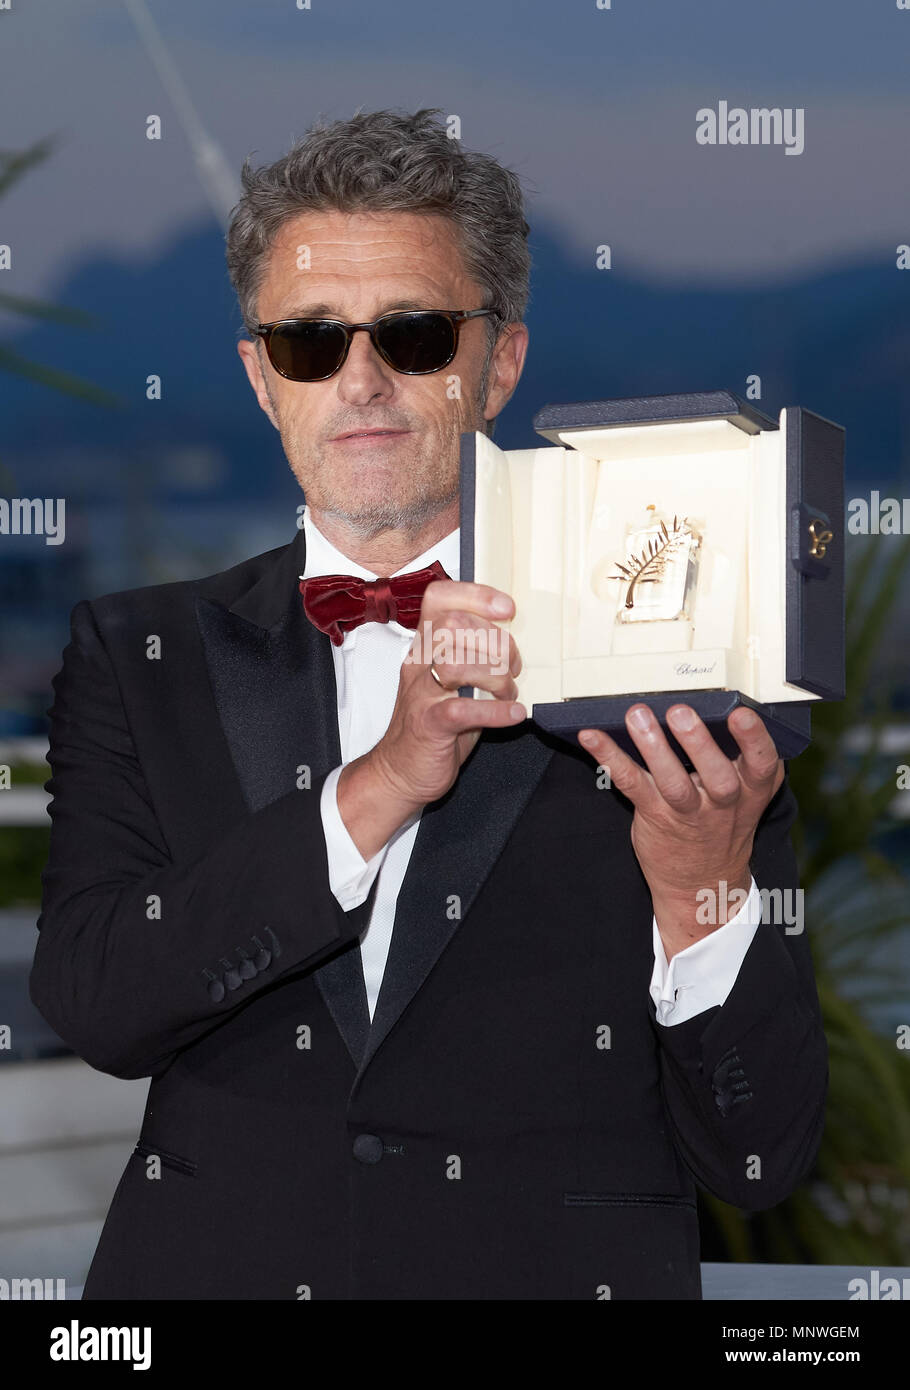 Director Pawel Pawlikowski poses with the Best Director award for 'Cold War' (Zimna Wojna) at the photocall the Palme D'Or Winner during the the 71st annual Cannes Film Festival at Palais des Festivals on May 19, 2018 in Cannes, France. (Photo by Oleg Nikishin) Stock Photo